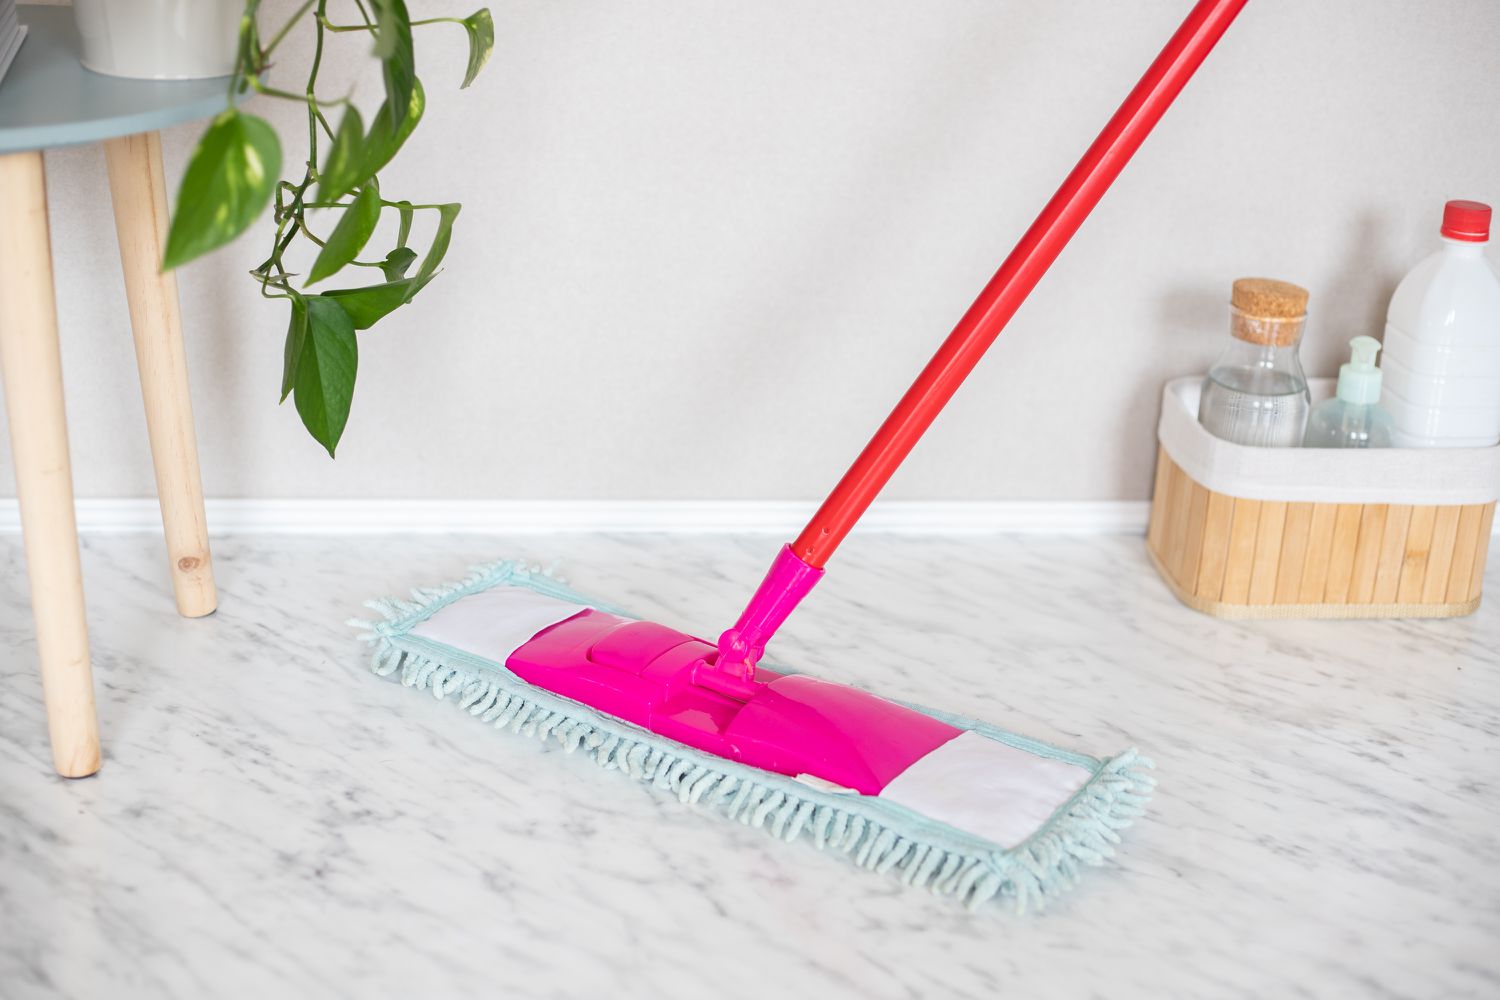 Dry mop passing over marble floor next to toiletries in basket